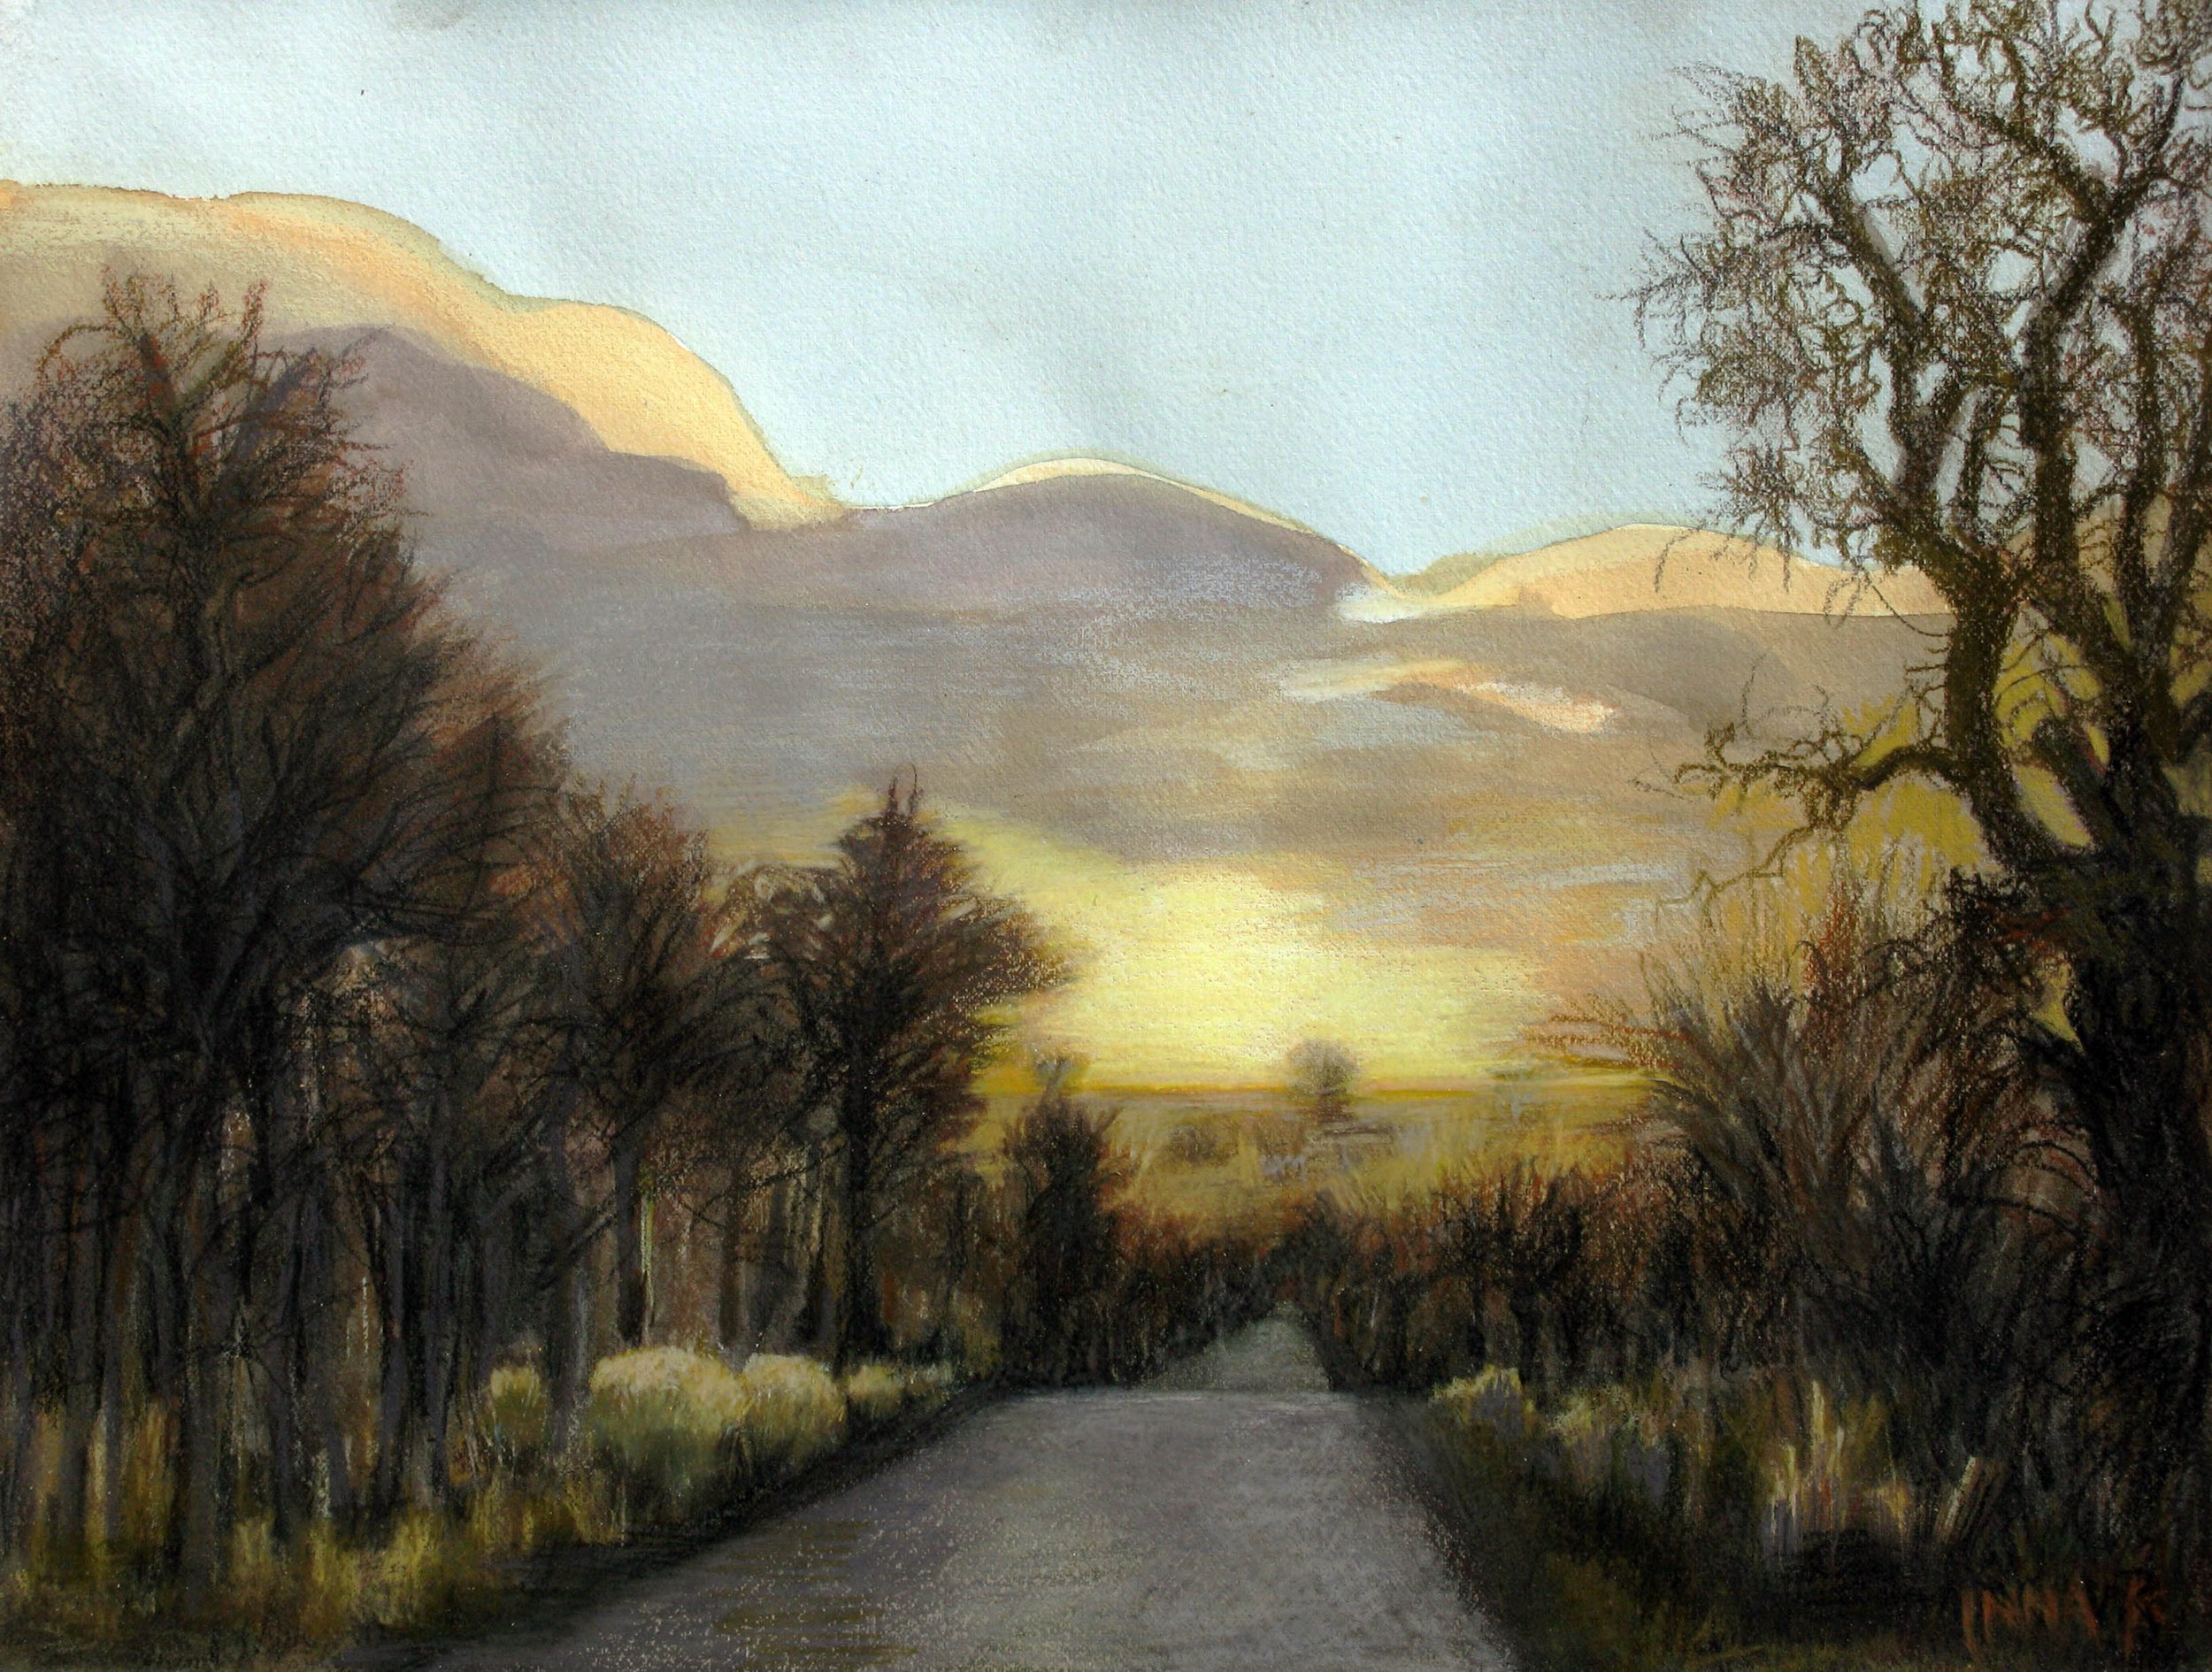 Dusk, Baker Creek Road – 2012, Private Collection, 